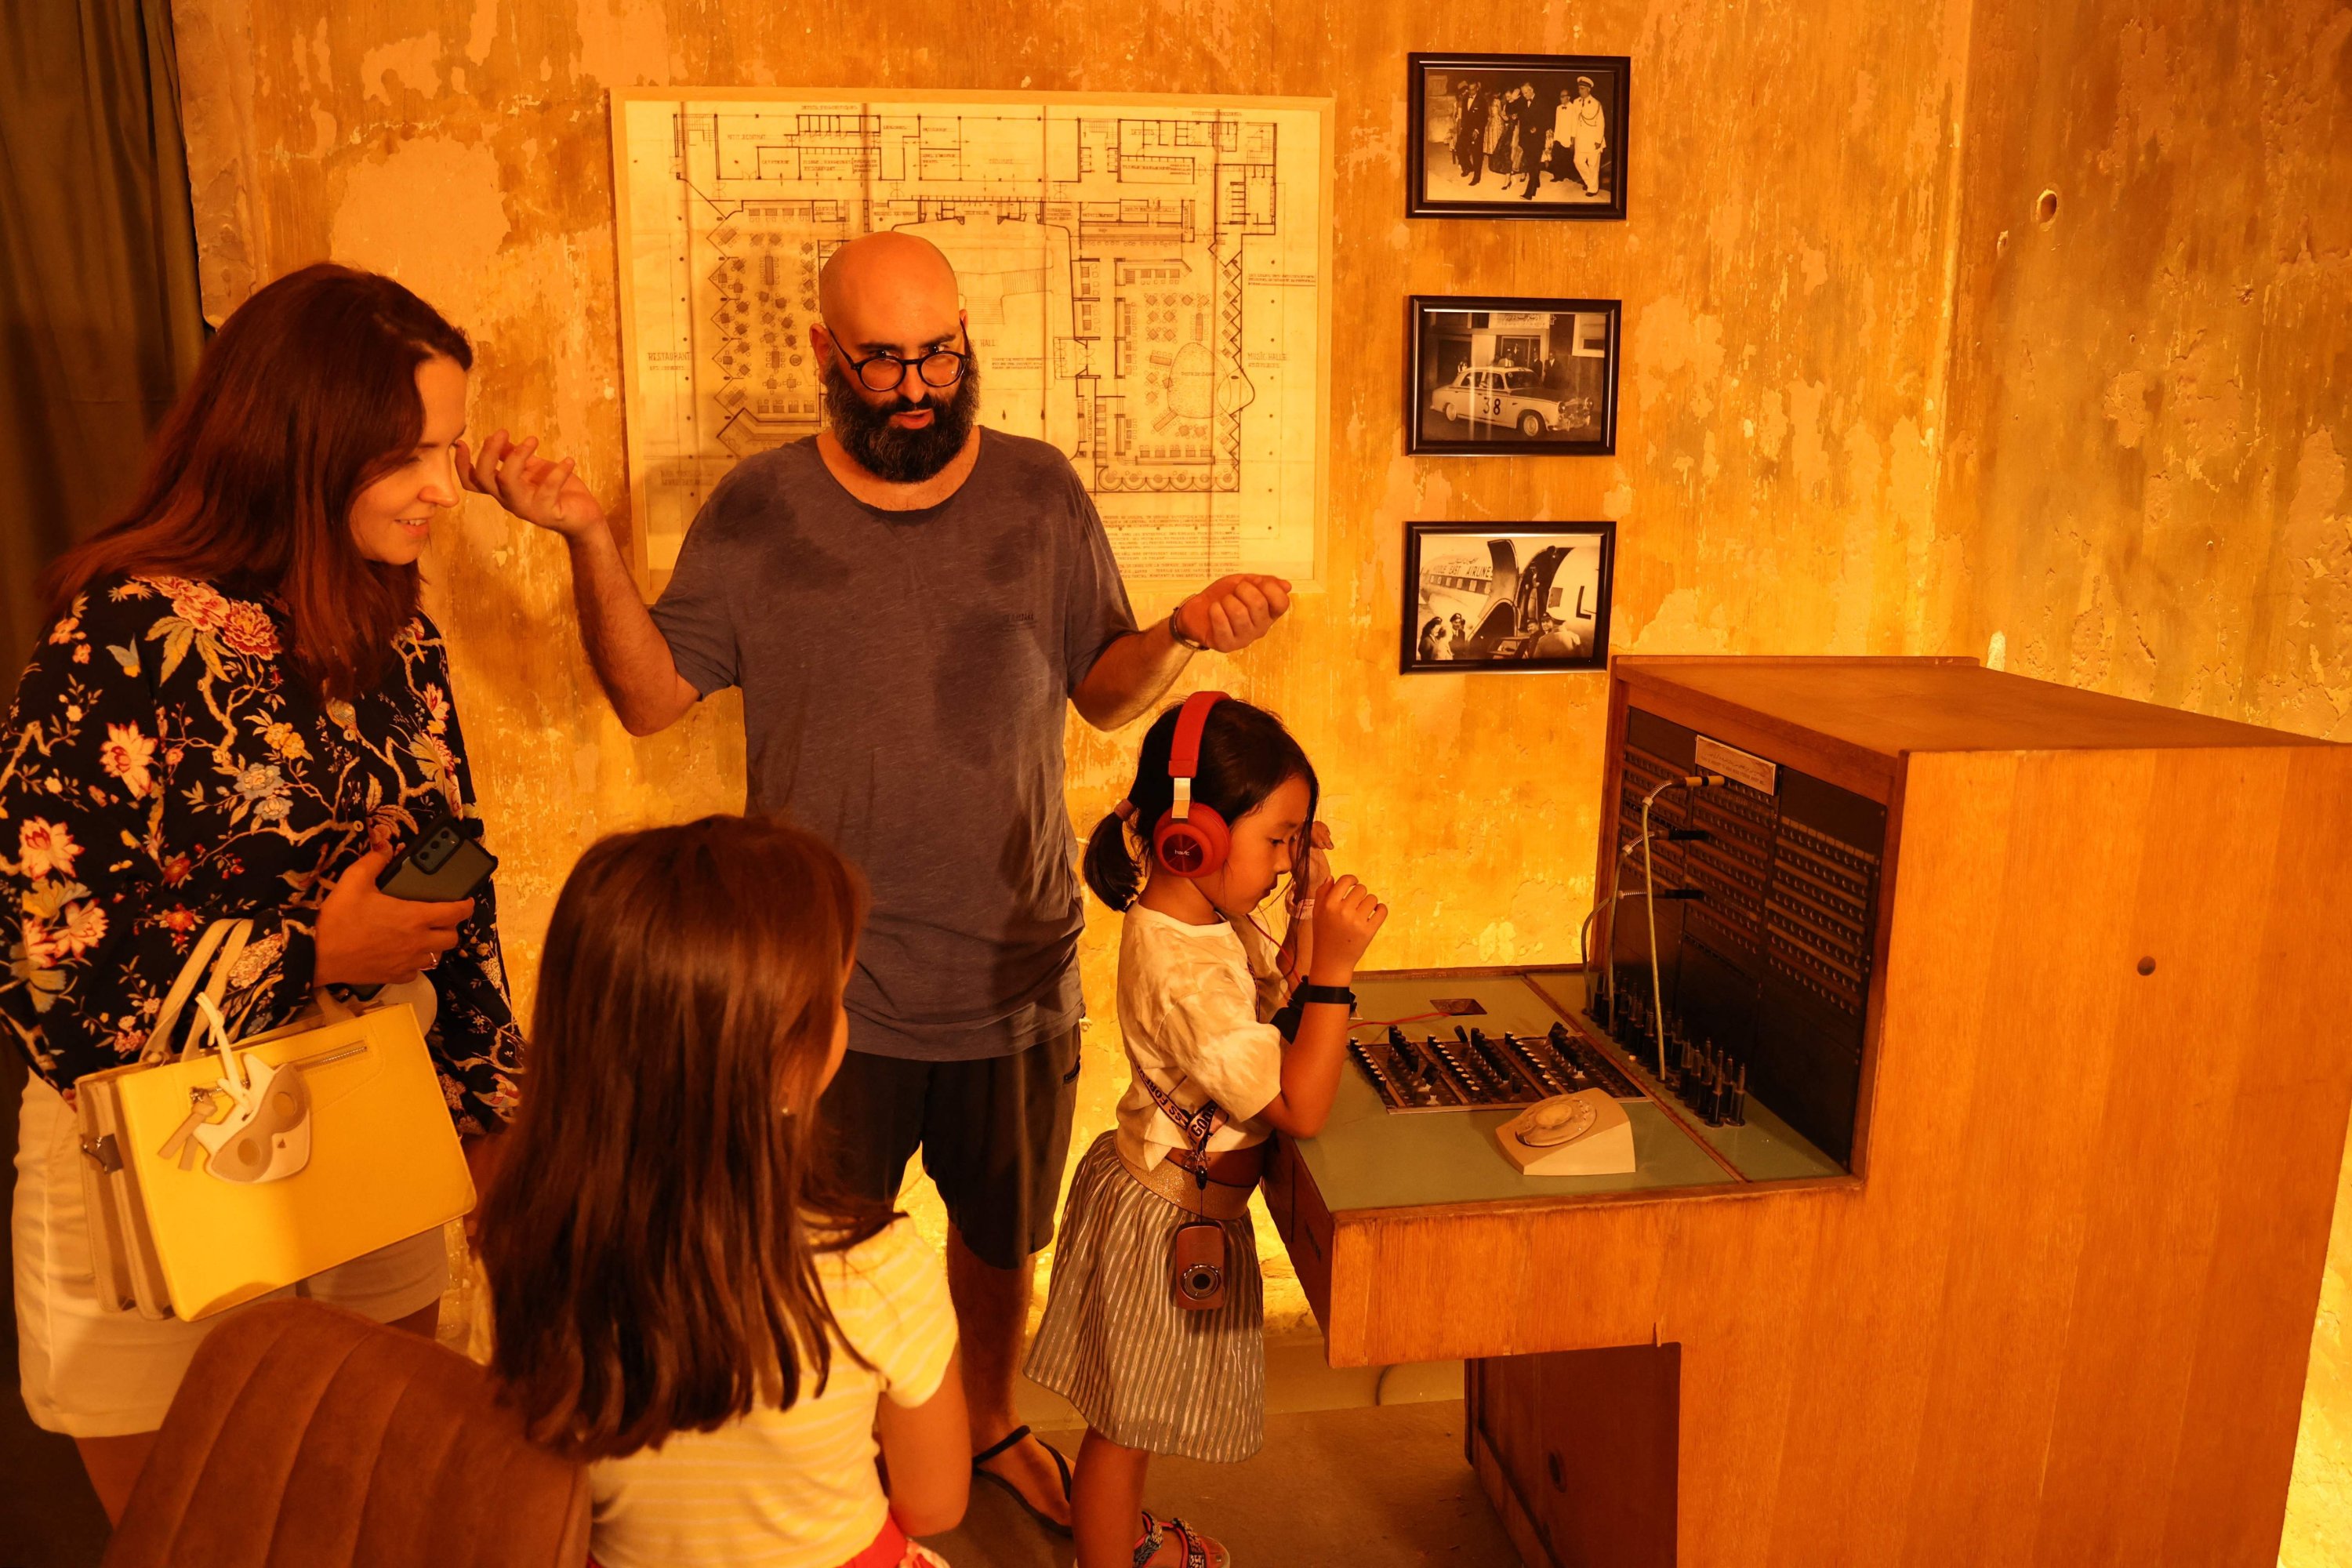 People in an exhibition titled "Allo, Beirut?," which shows archives of Lebanon's troubled past fused with artistic depictions of a grim present, at the capital's Beit Beirut heritage-house-turned-museum, Beirut, Lebanon, Sept. 15, 2022. (AFP Photo)